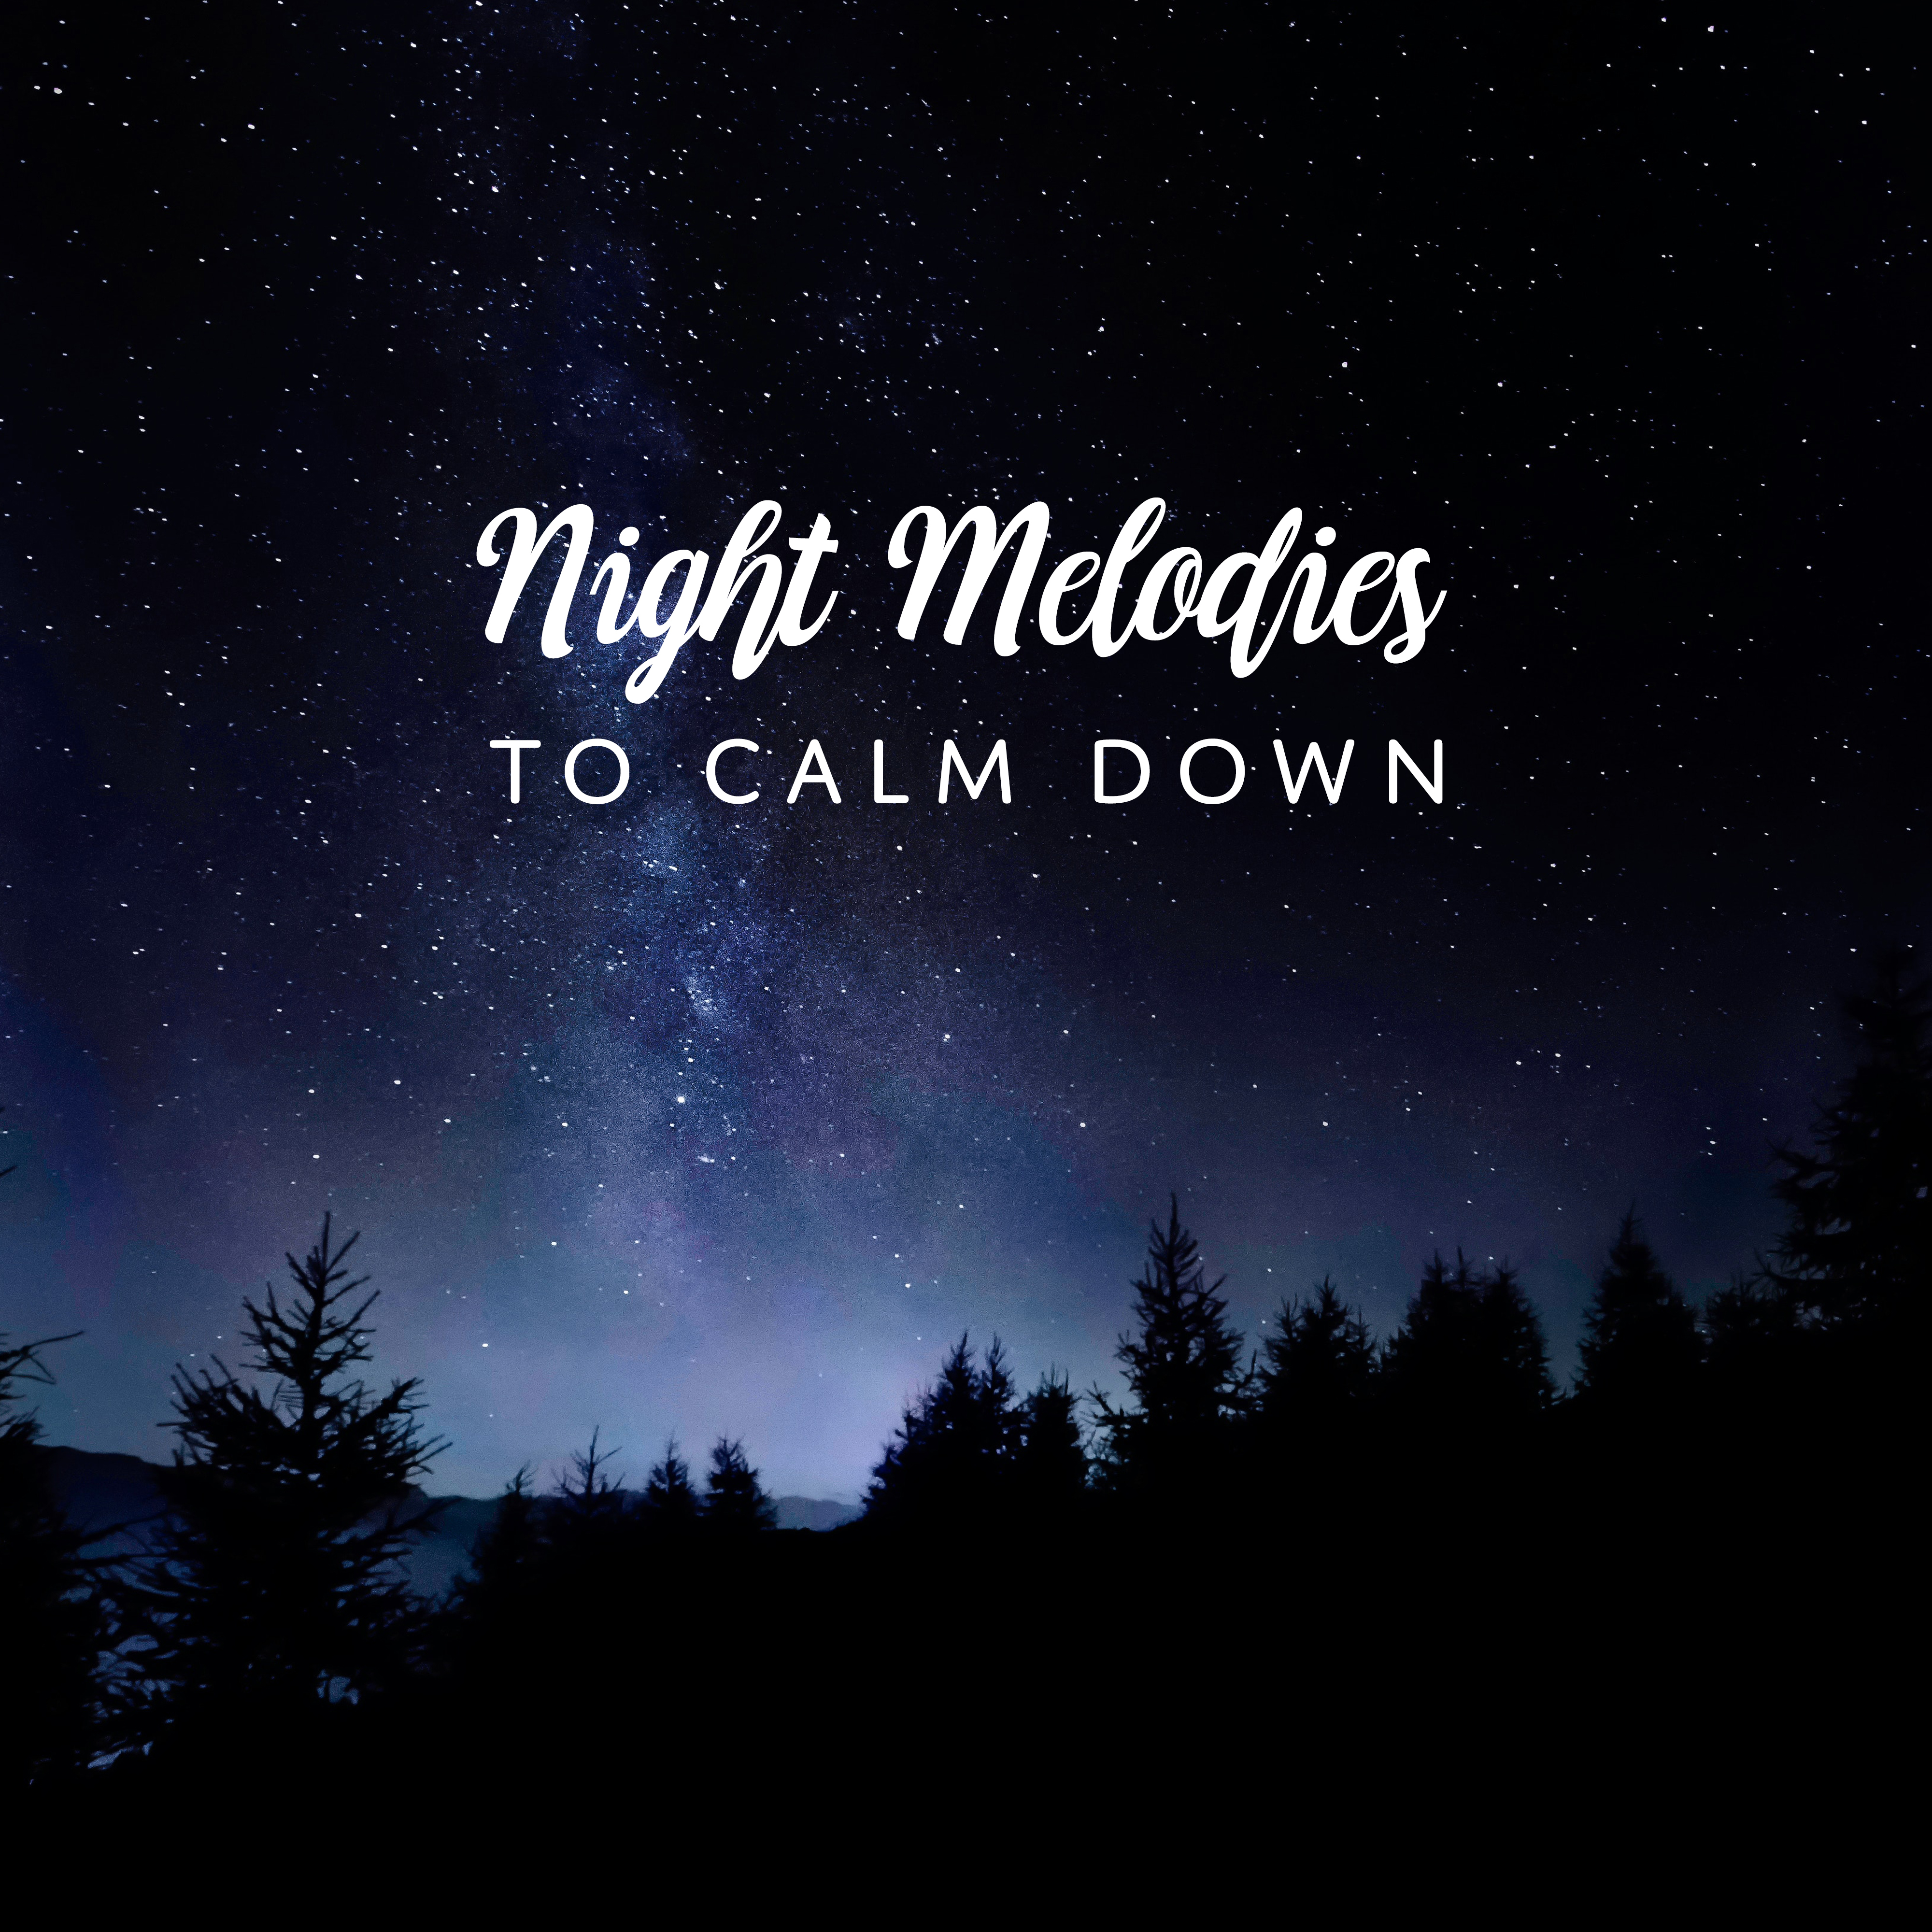 Night Melodies to Calm Down